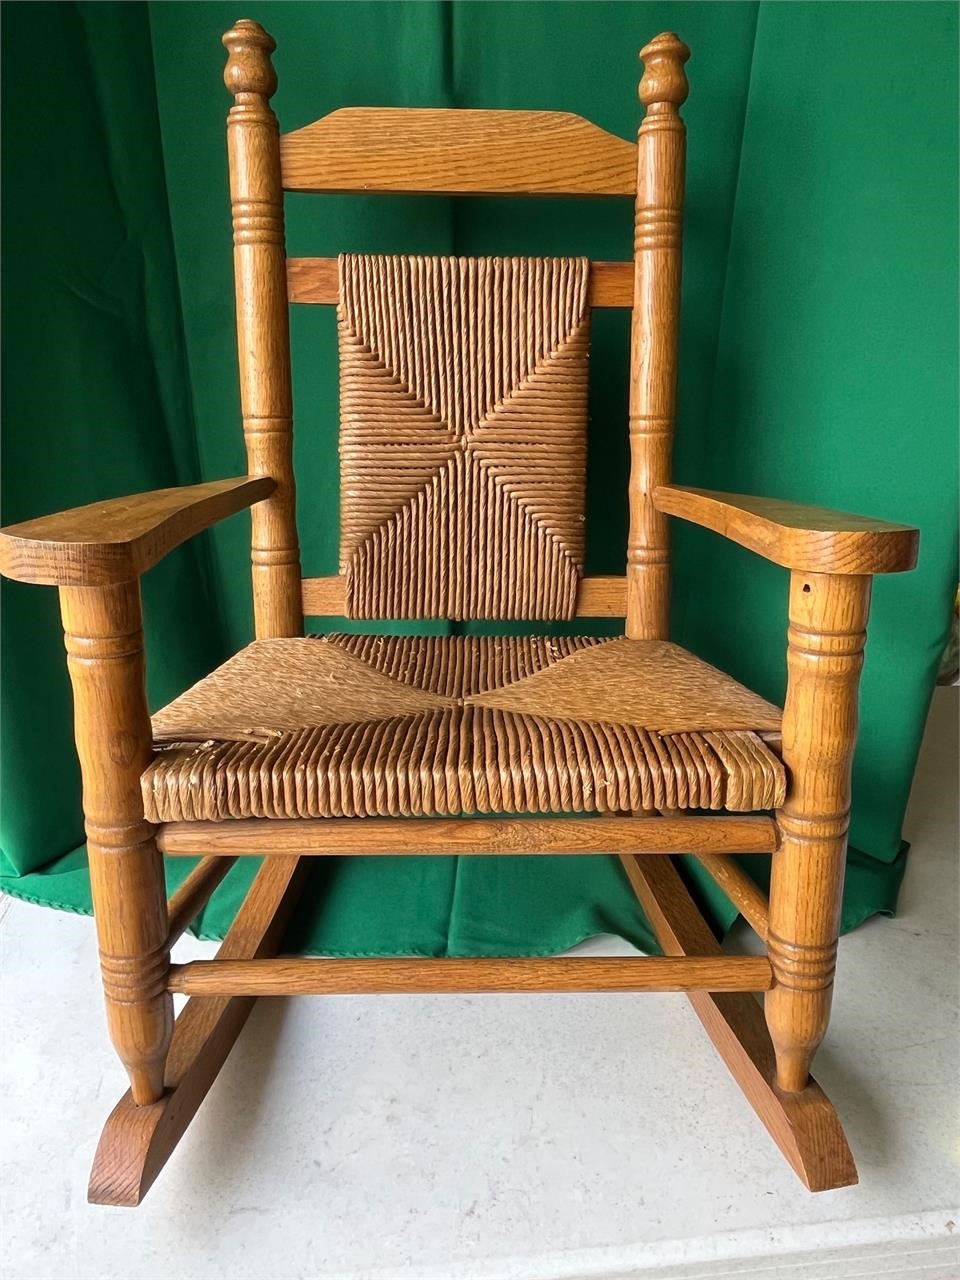 Vintage Rocking Chair 36” tall